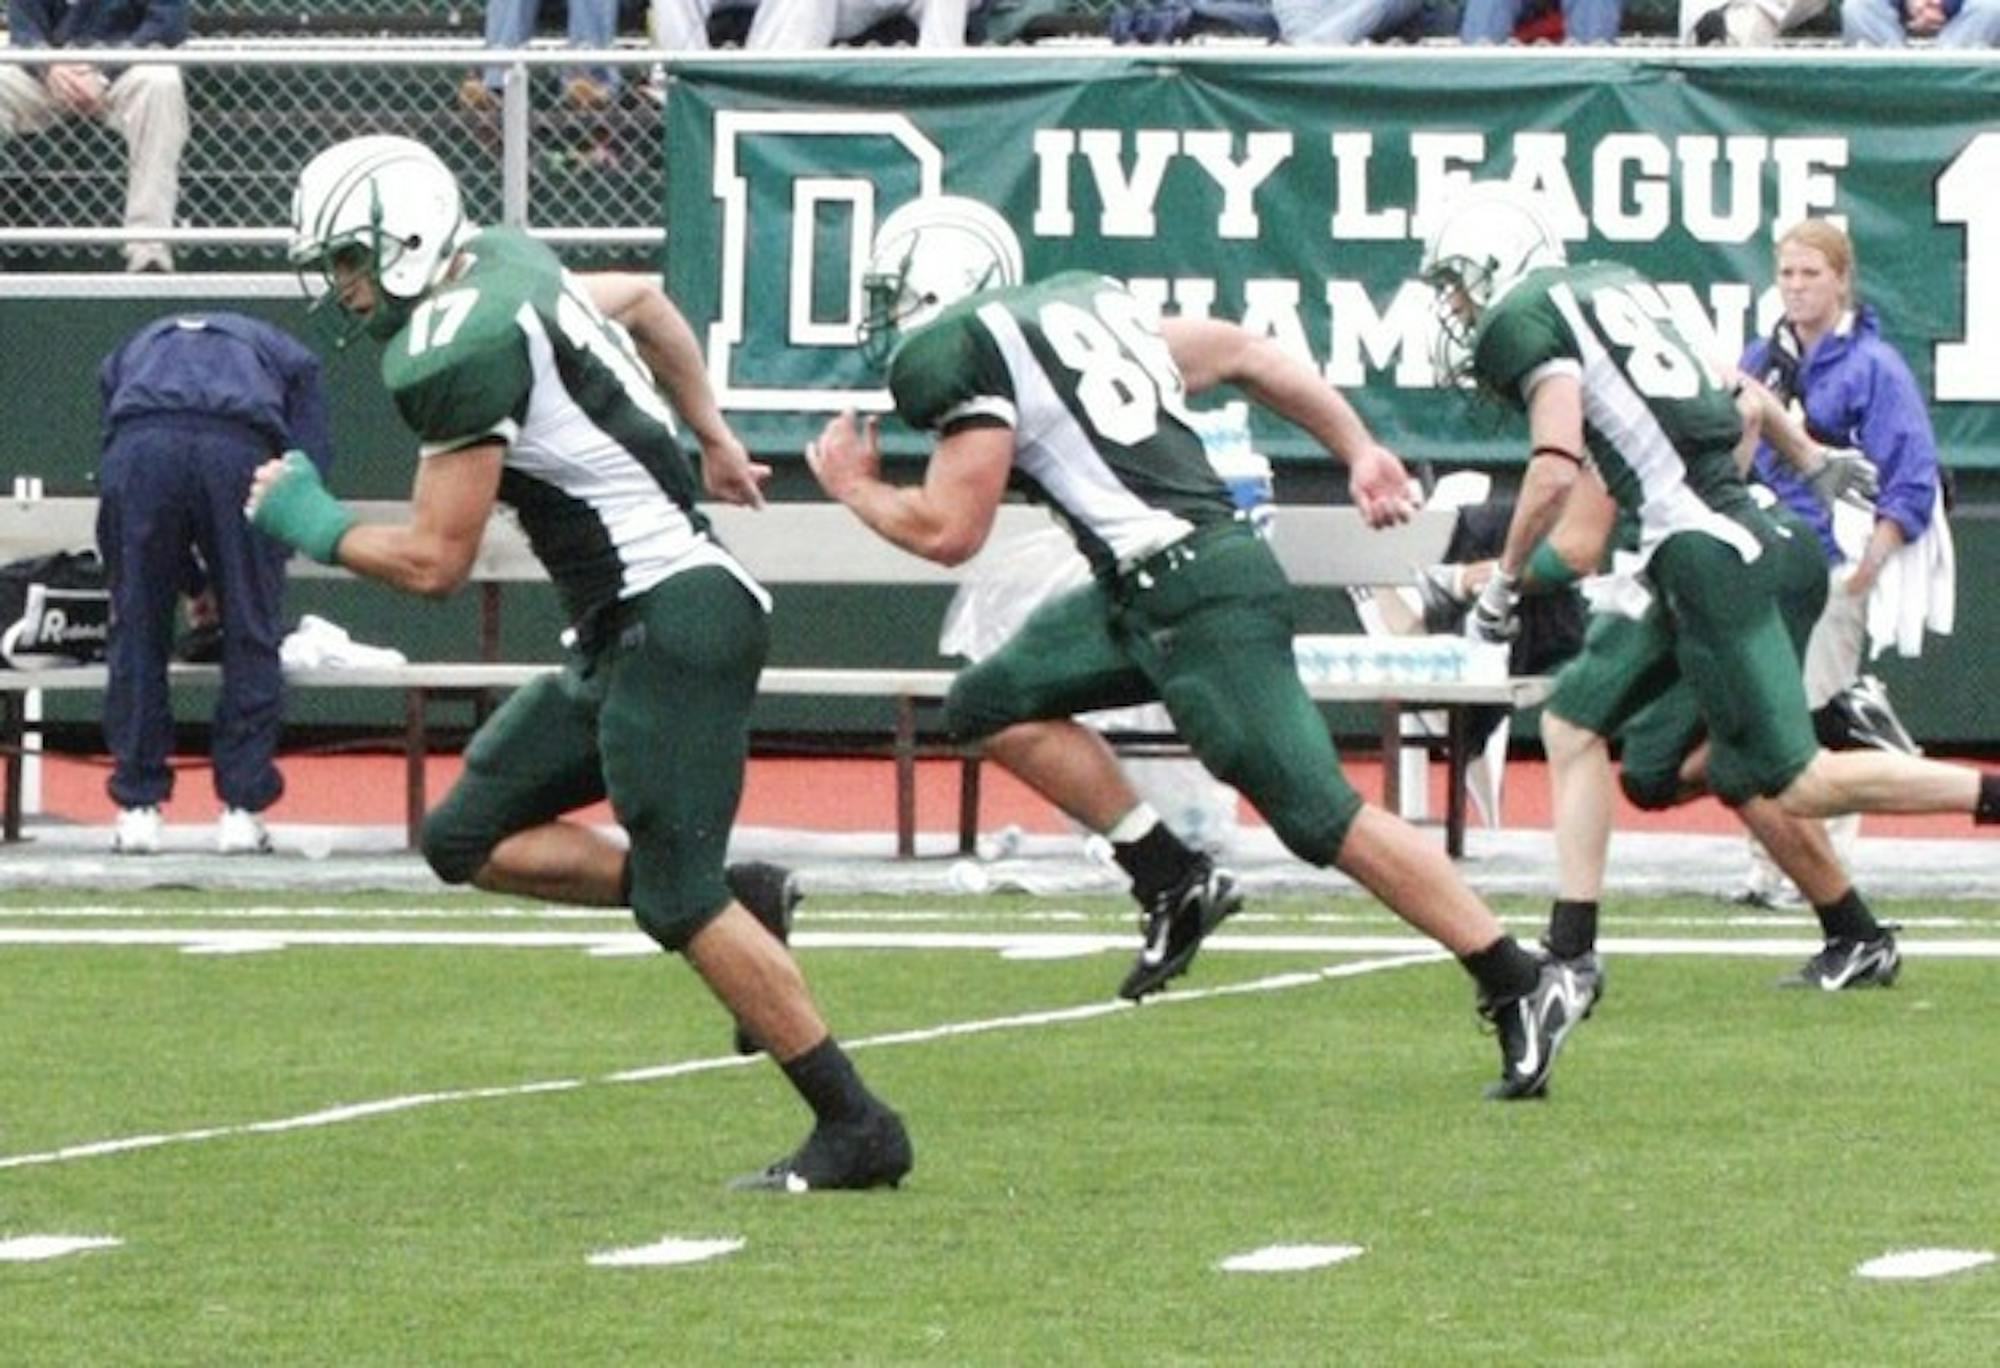 Dartmouth's kickoff coverage unit will be tested this weekend against a Yale team that averages more than 23 yards per return to lead the Ivy League.